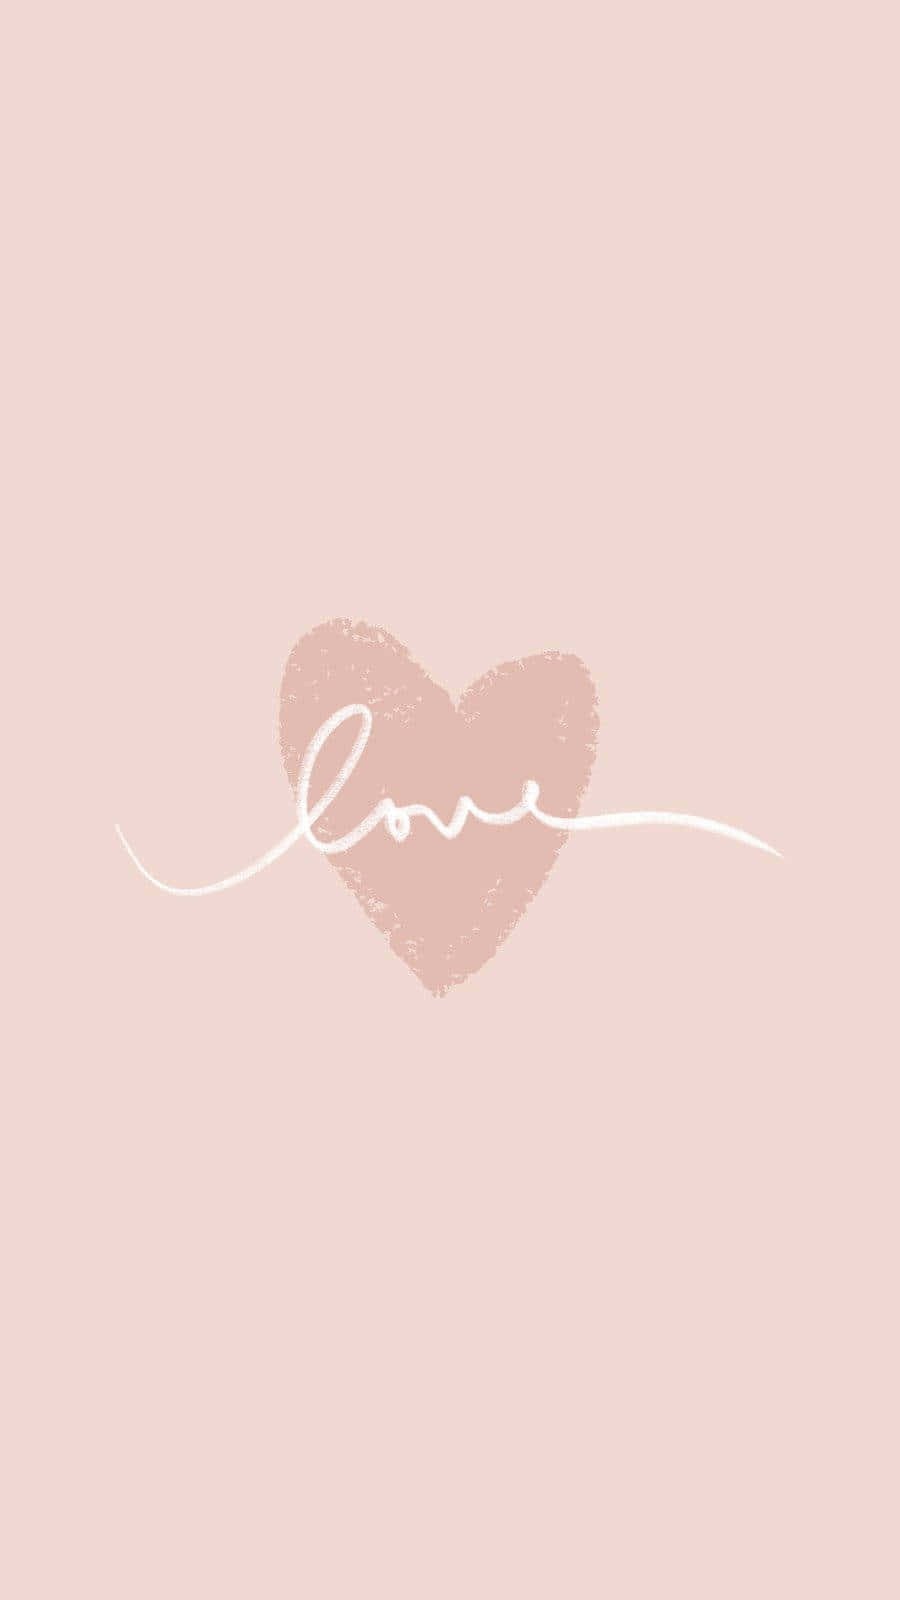 Love Heart On A Pink Background